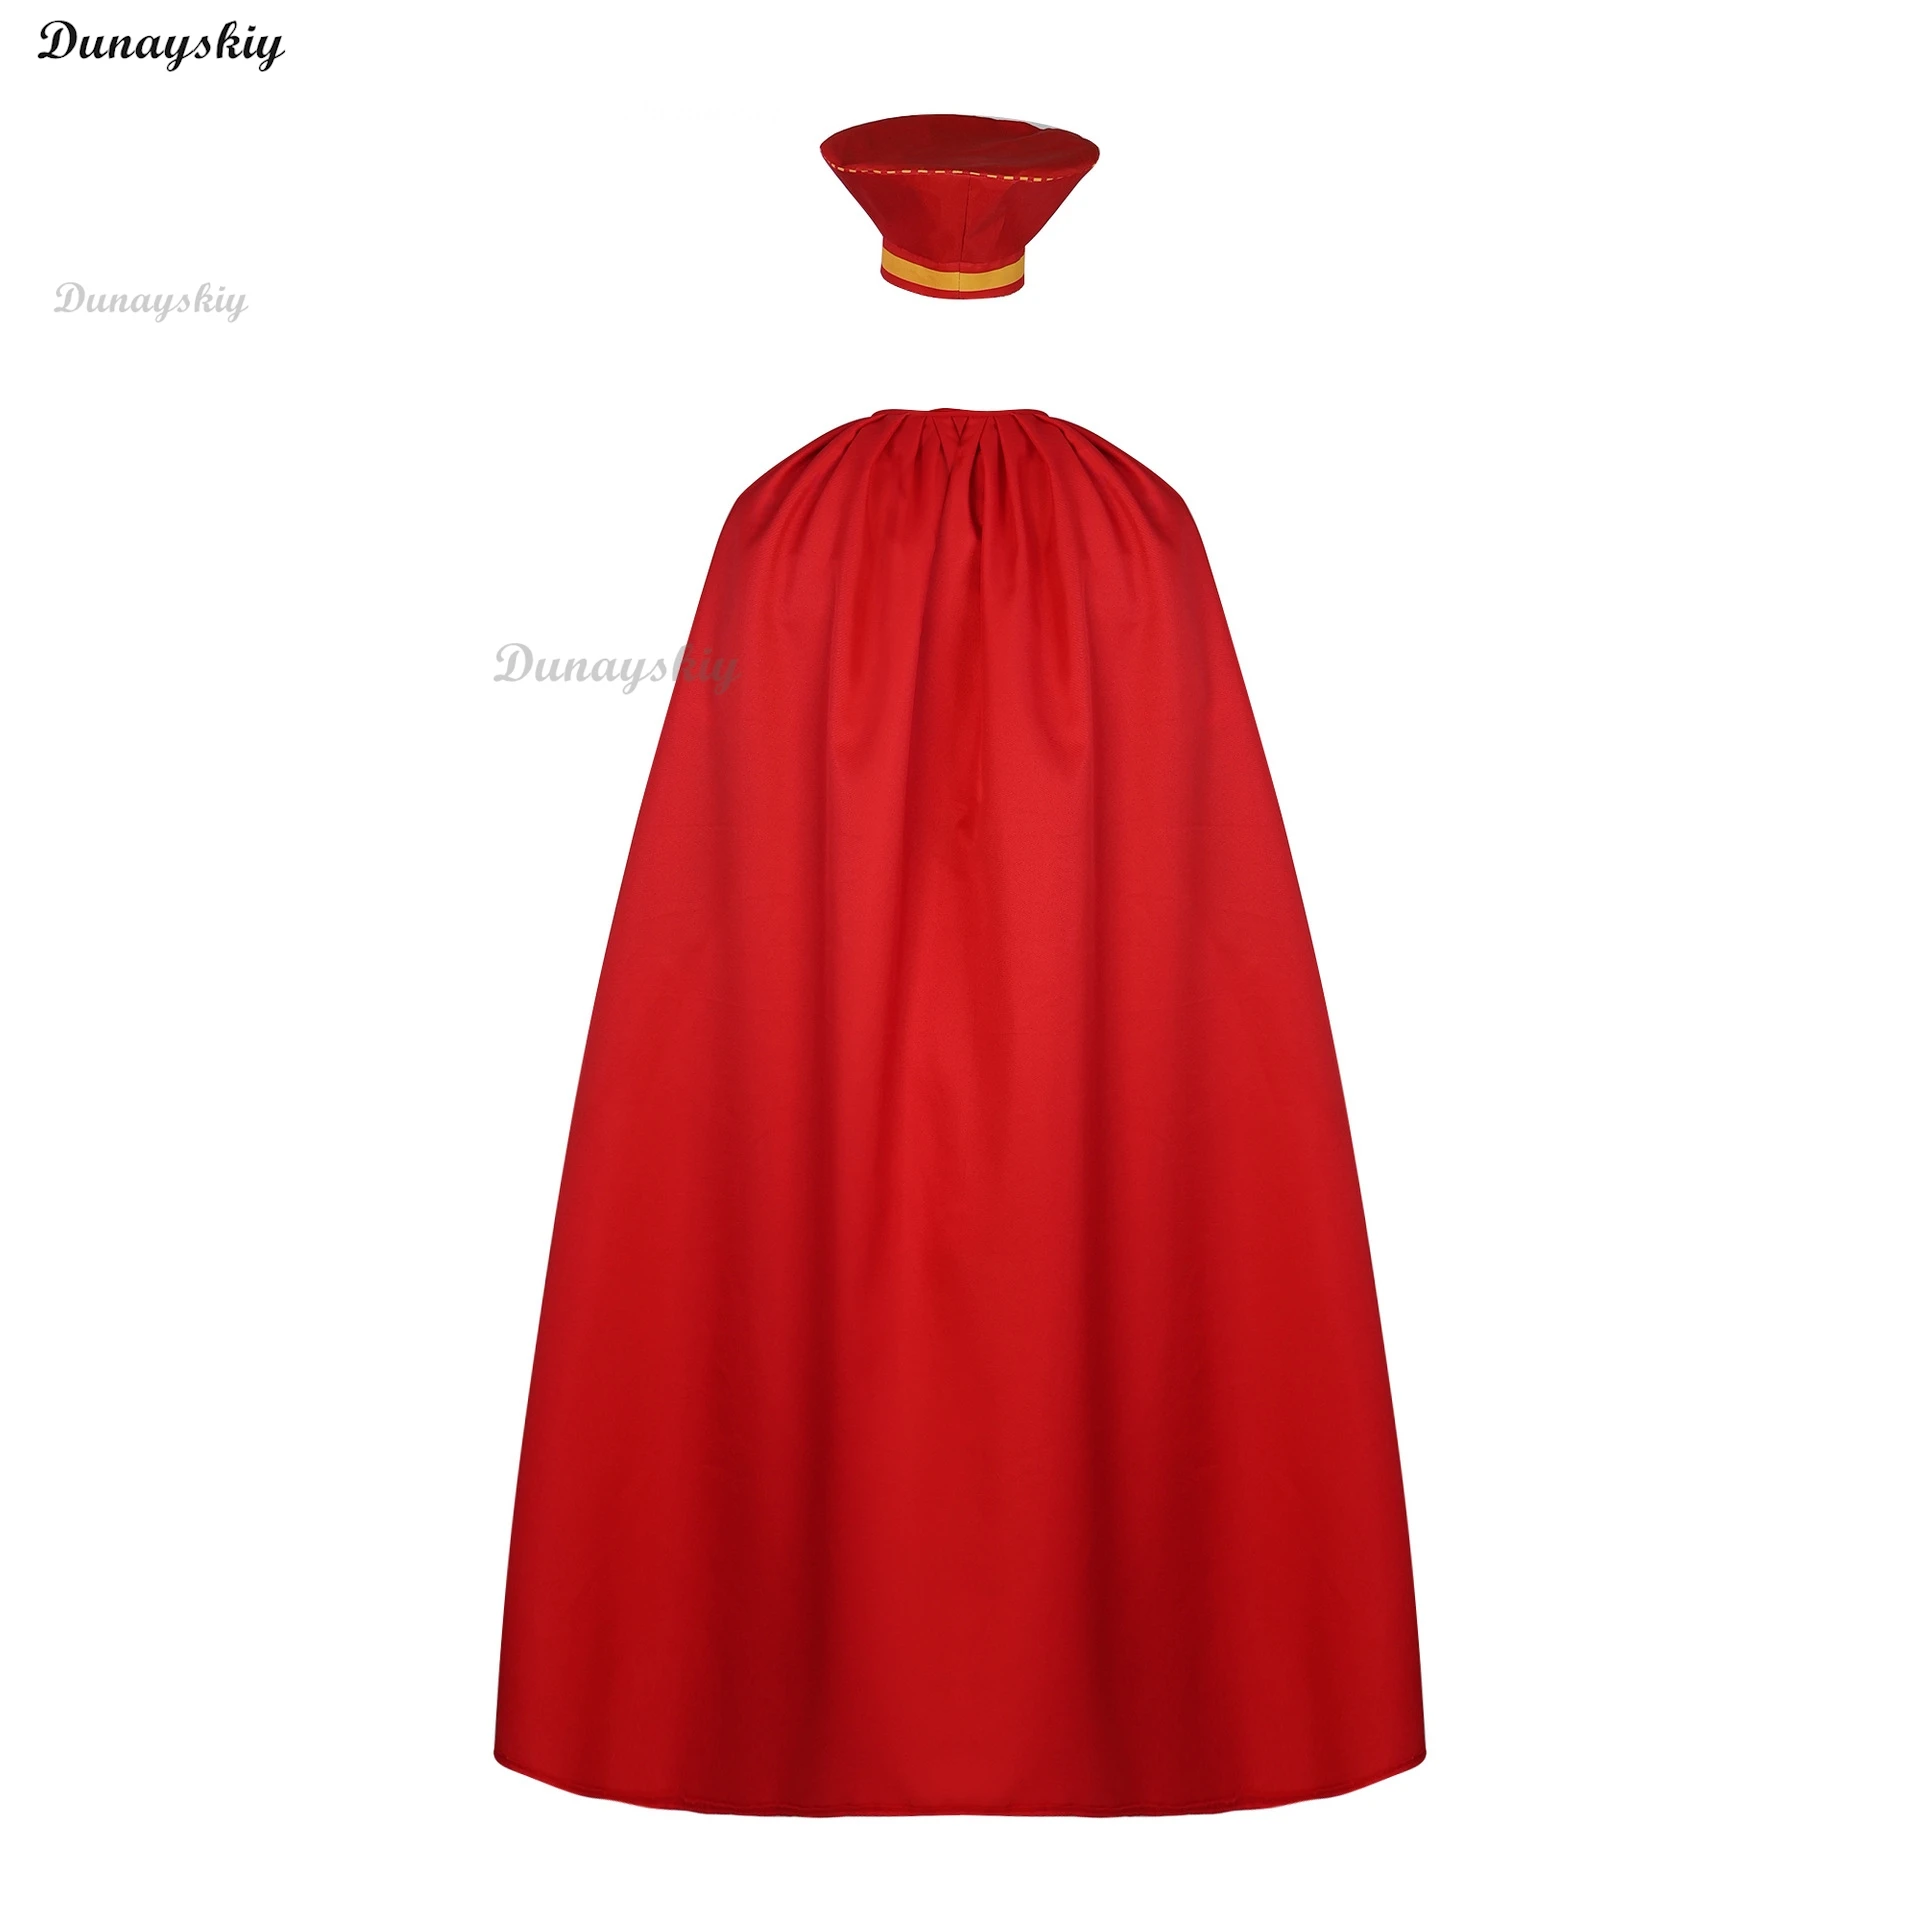 Lord Farquaad Cosplay Anime Costume Uniform Cloak Glove Hat Set Medieval Cosplay Halloween Party Red Outfit for Kid Women Men